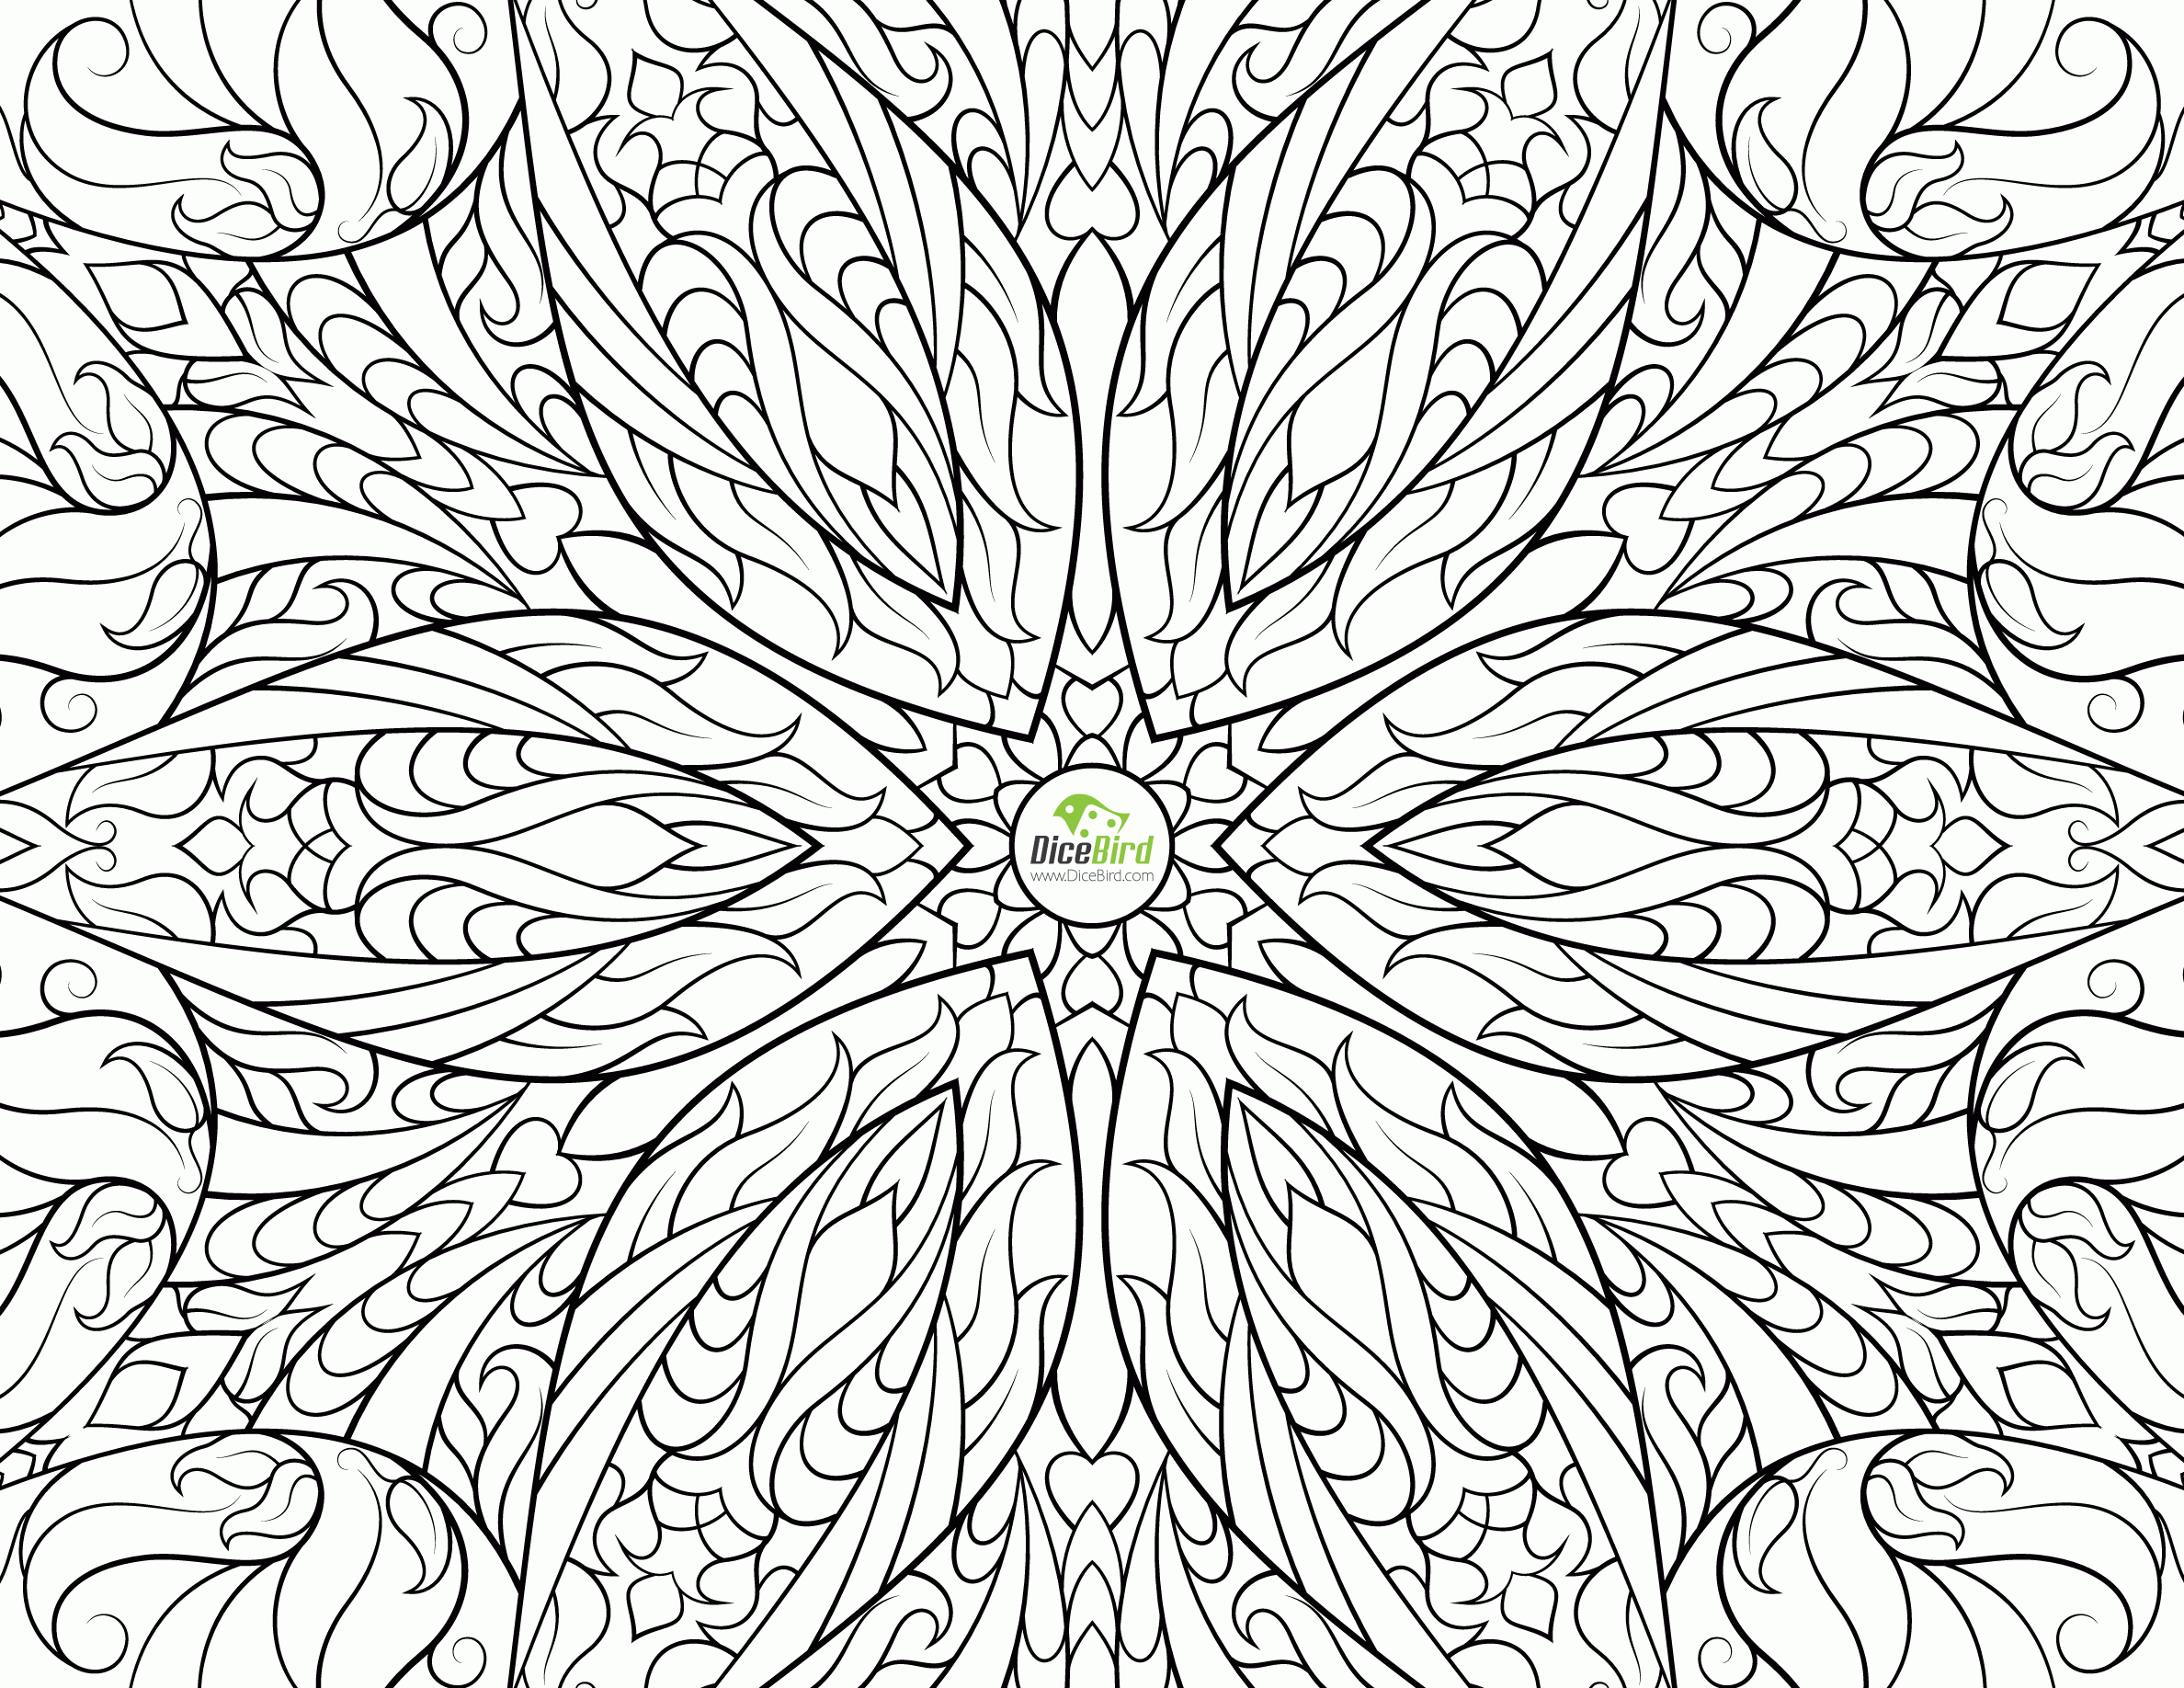 Freedom Flower difficult coloring pages for adults